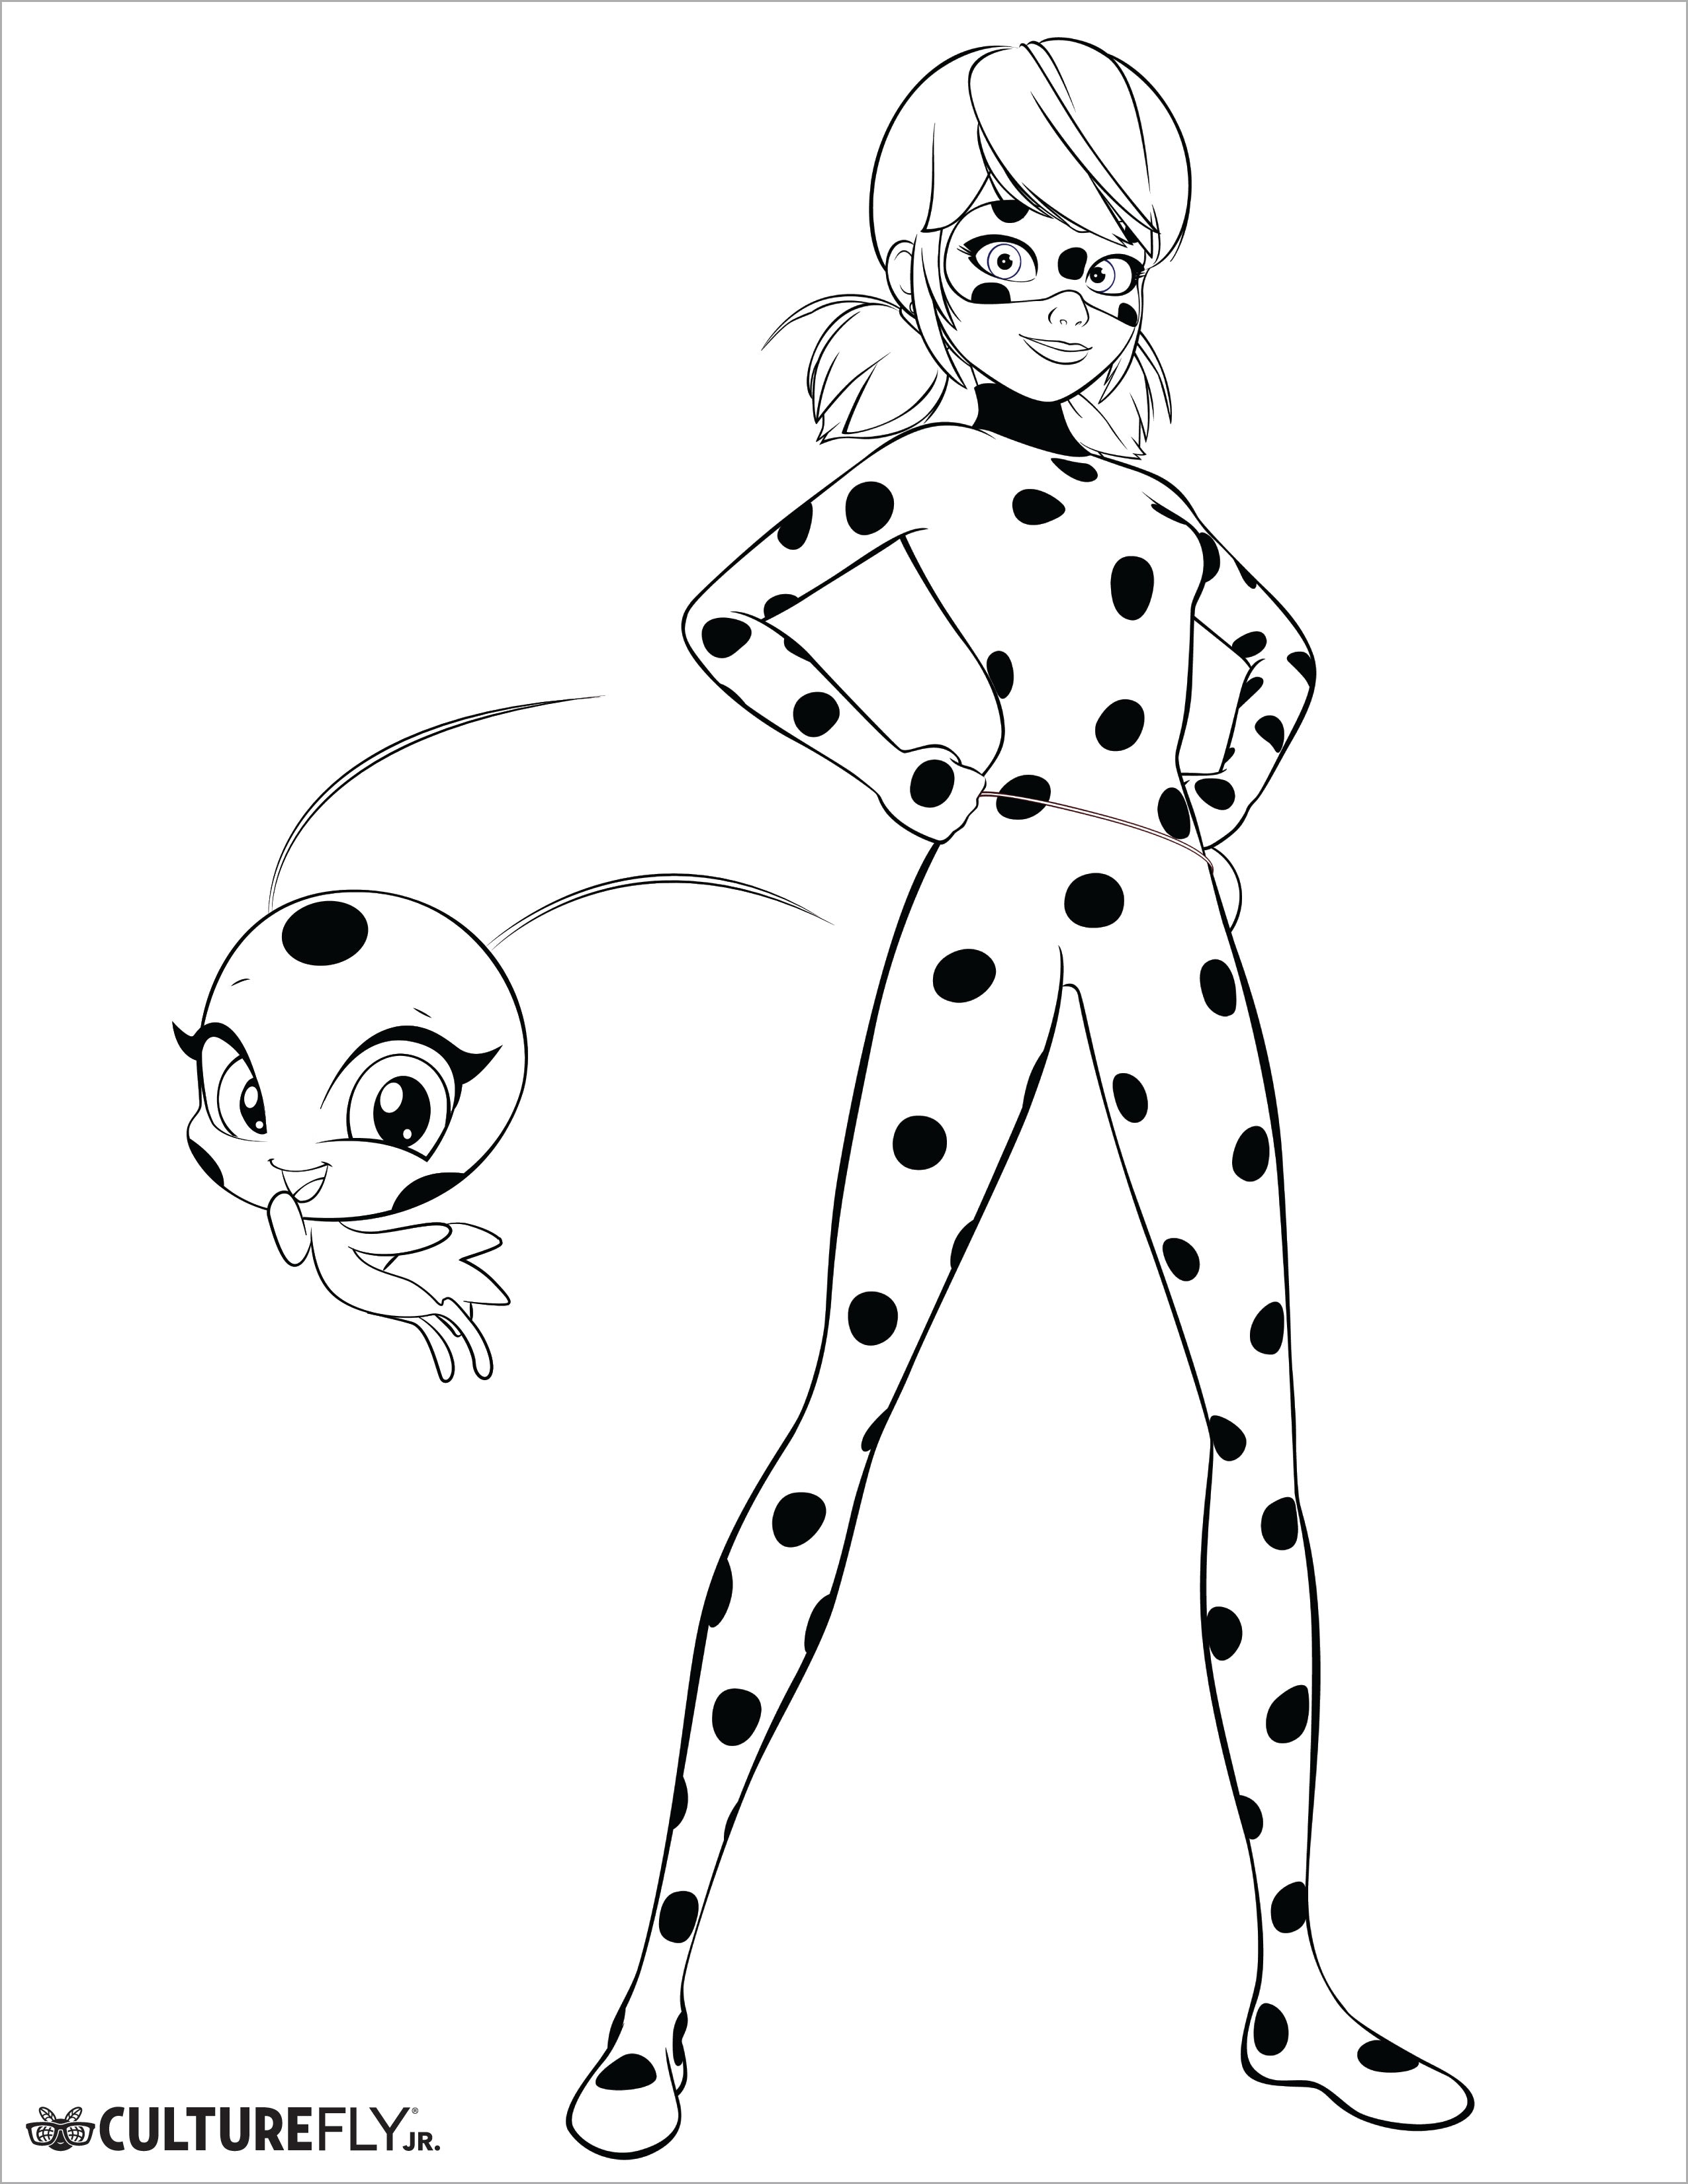 Miraculous Ladybug Coloring Pages - Bestcoloringpages.net 689